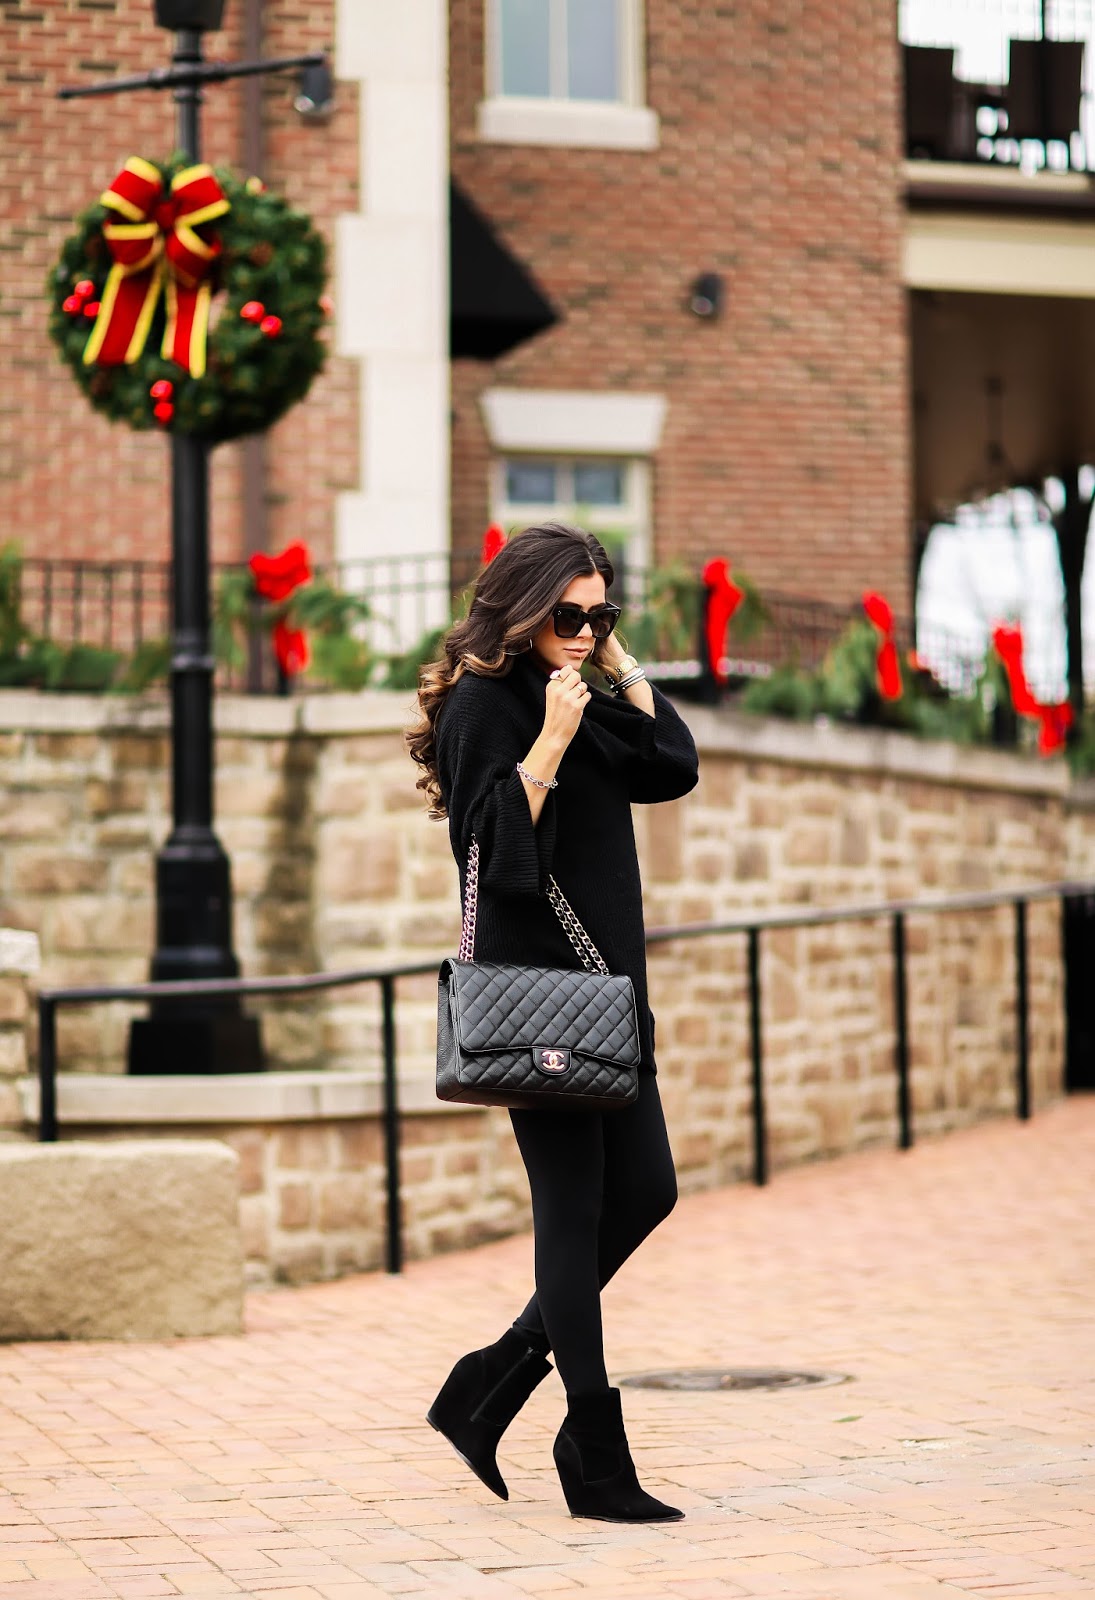 Chic All Black For Christmas Time